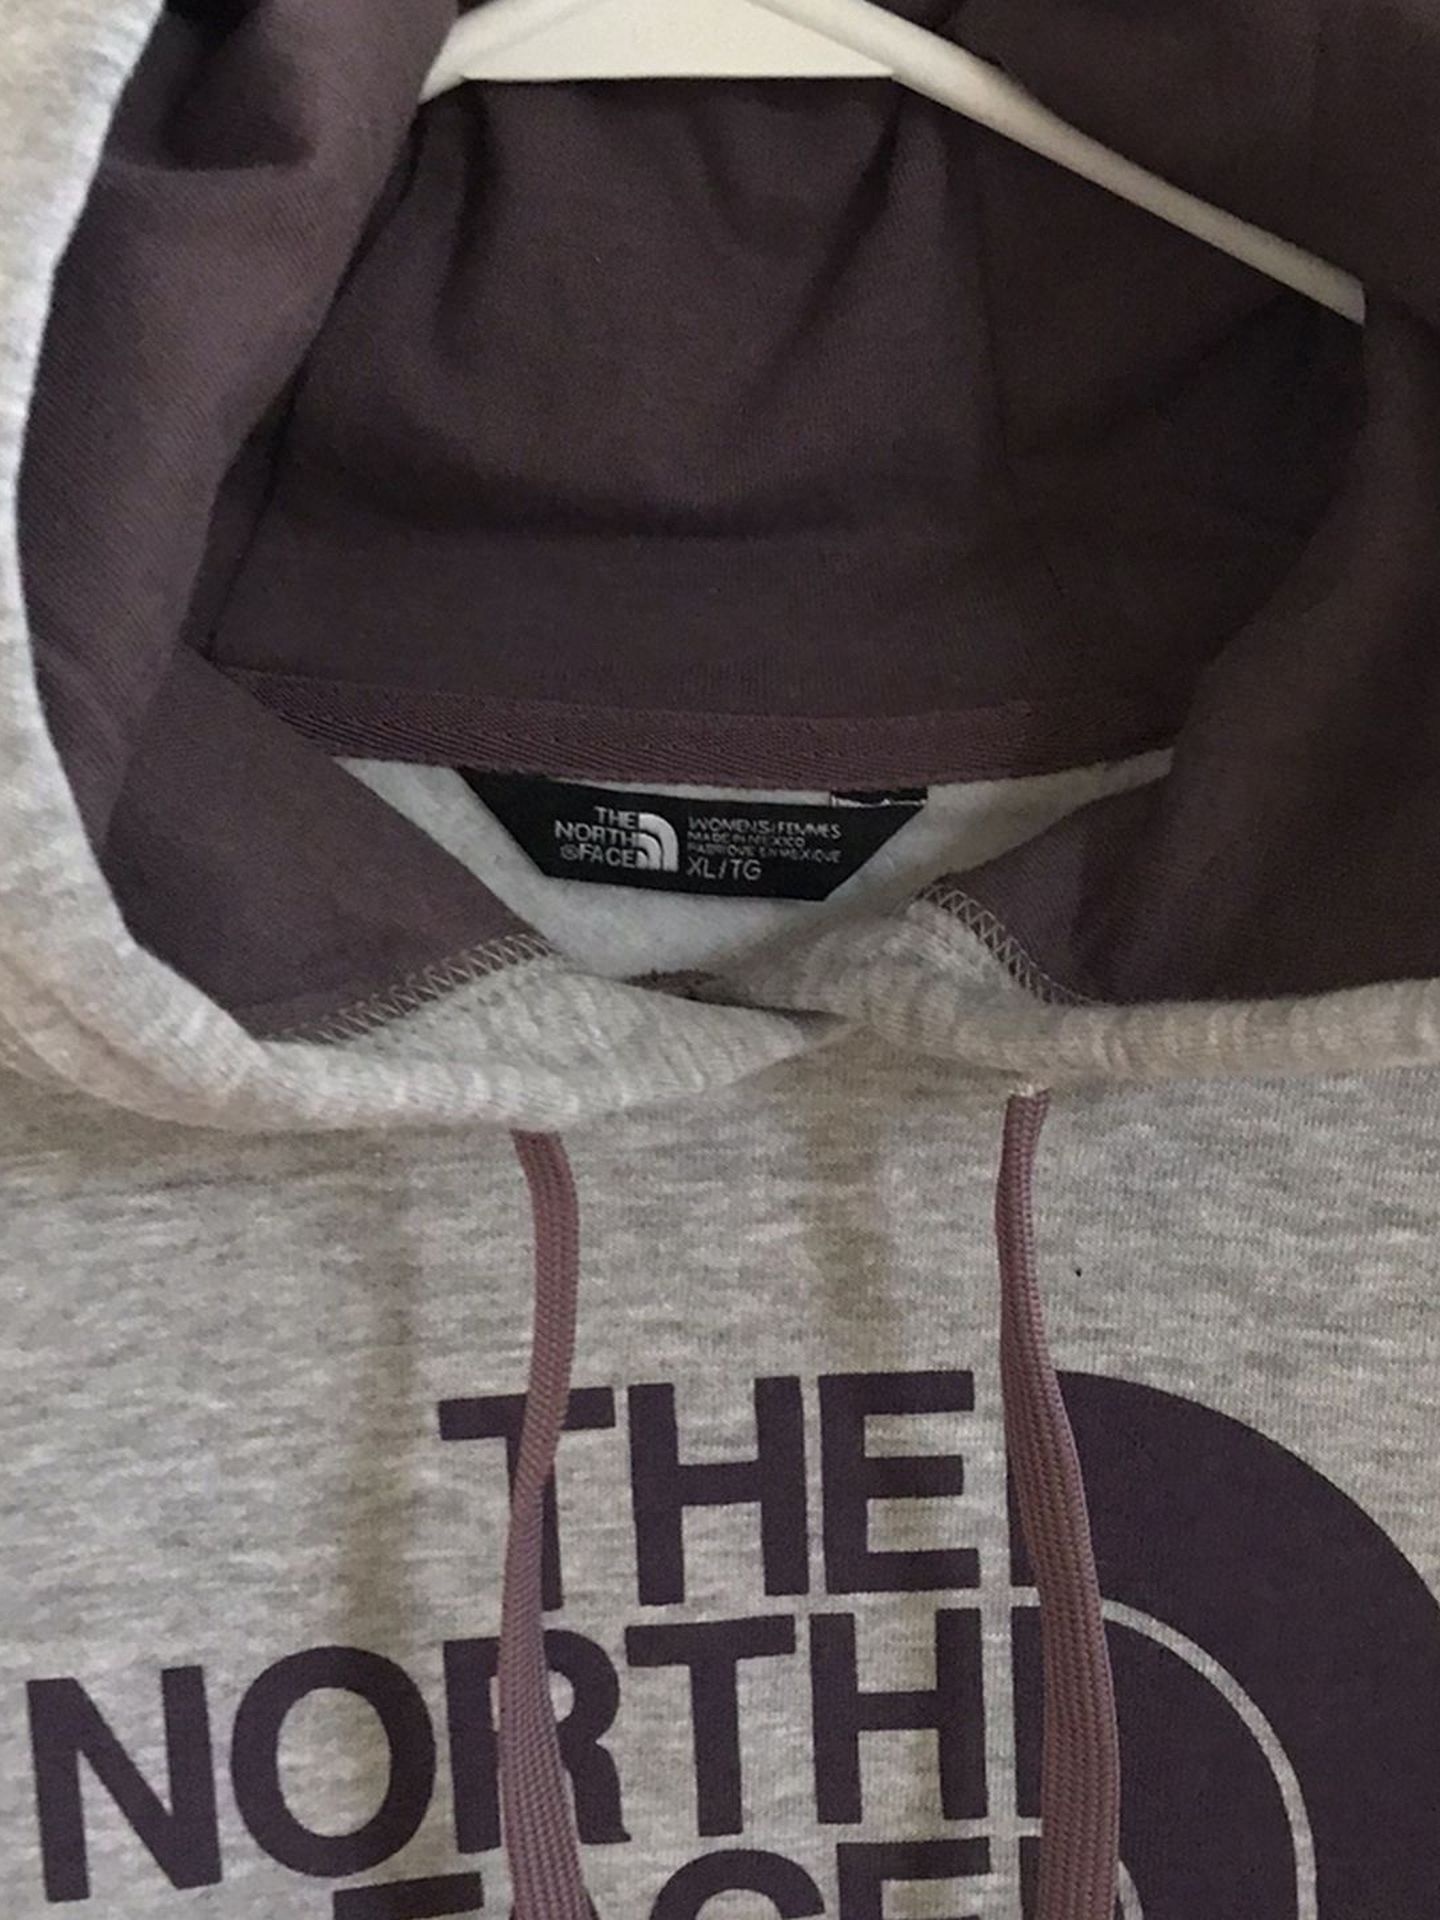 North Face Half Dome Hoodie, NWT, Paid $55+tax